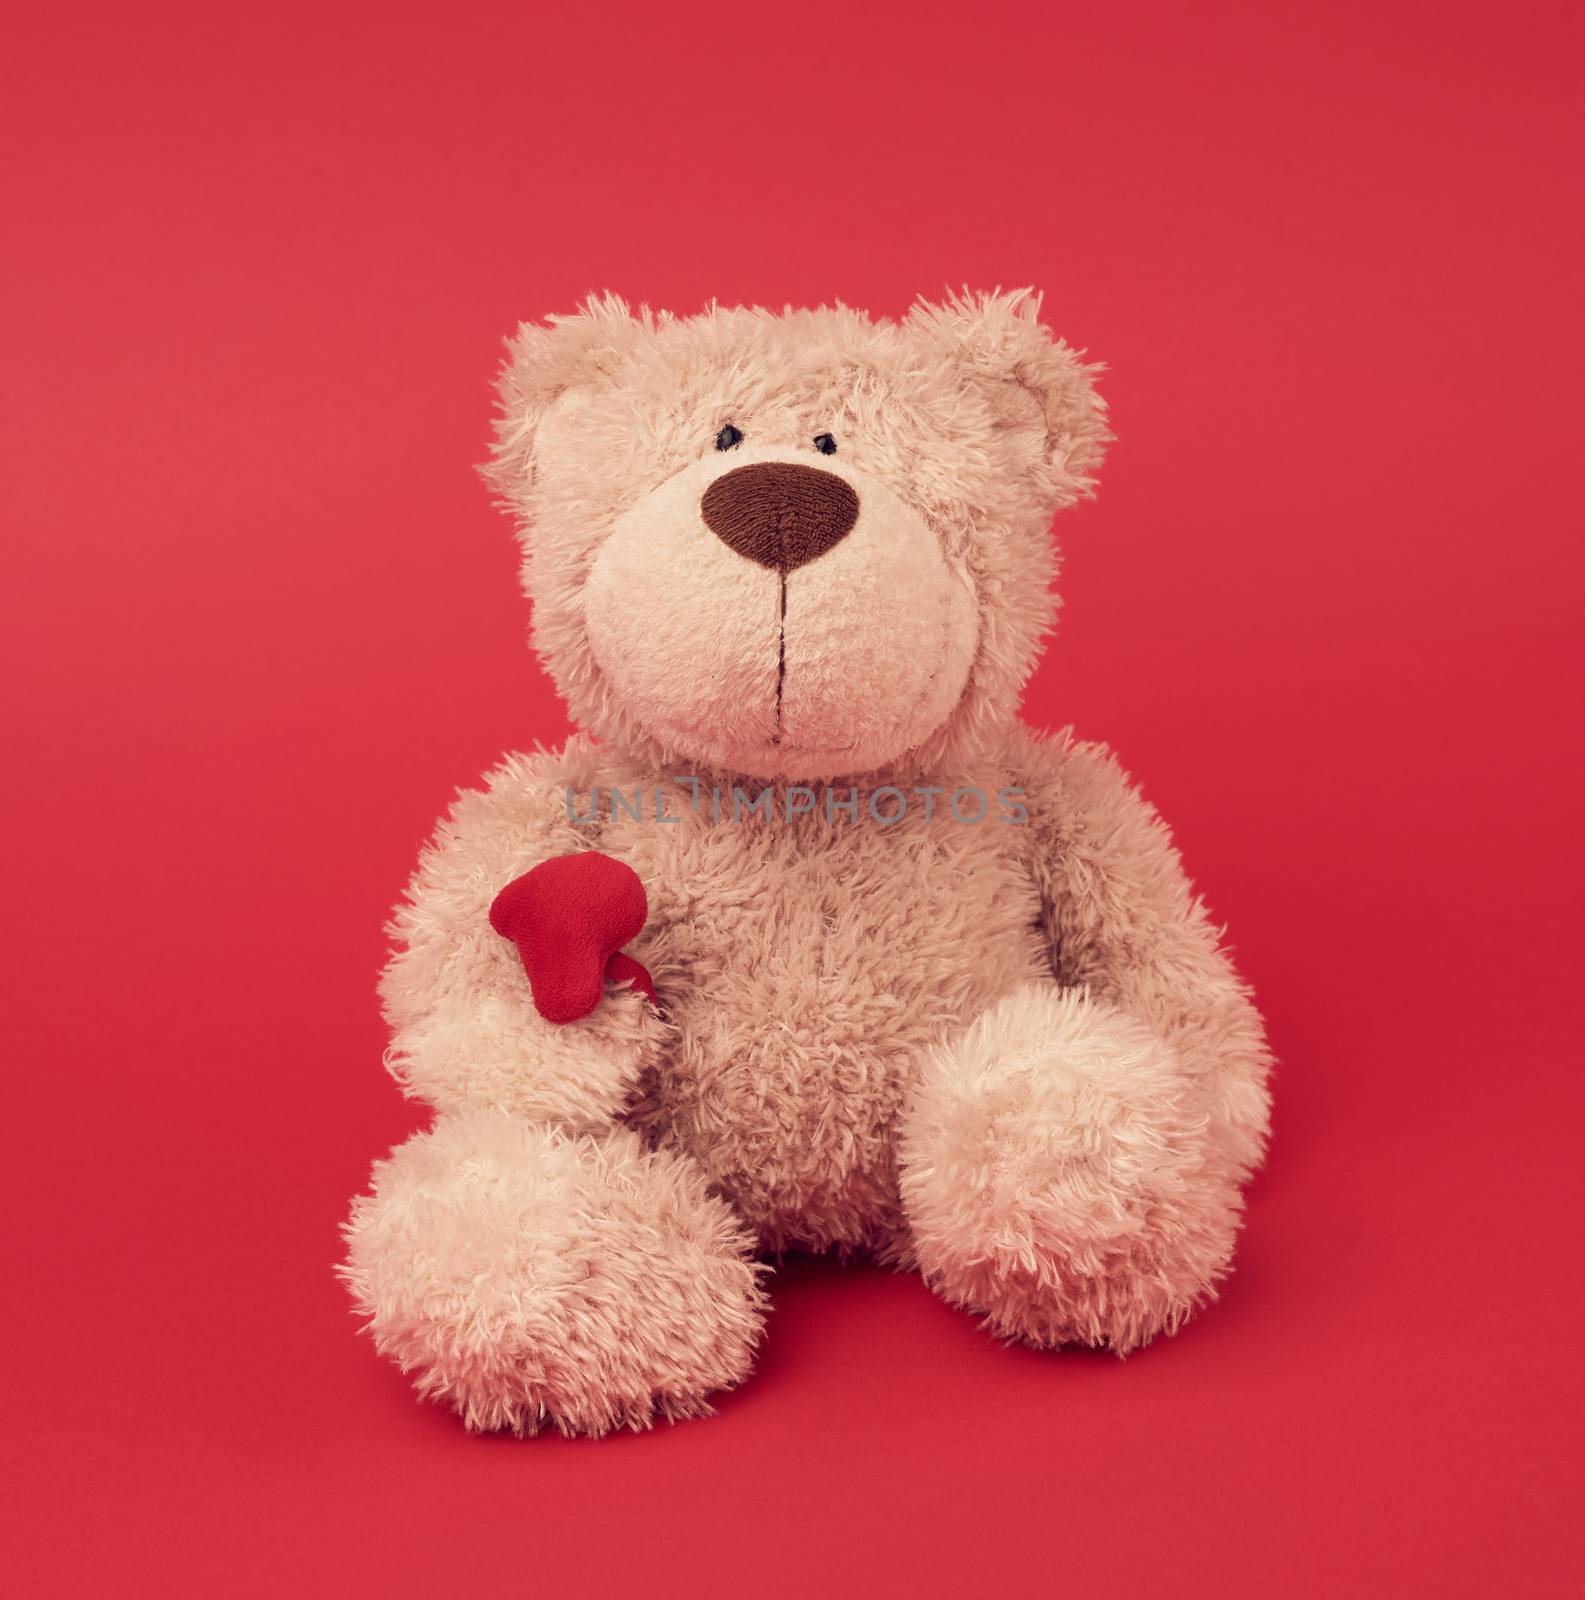  little brown teddy bear, toy is sitting on a red background by ndanko